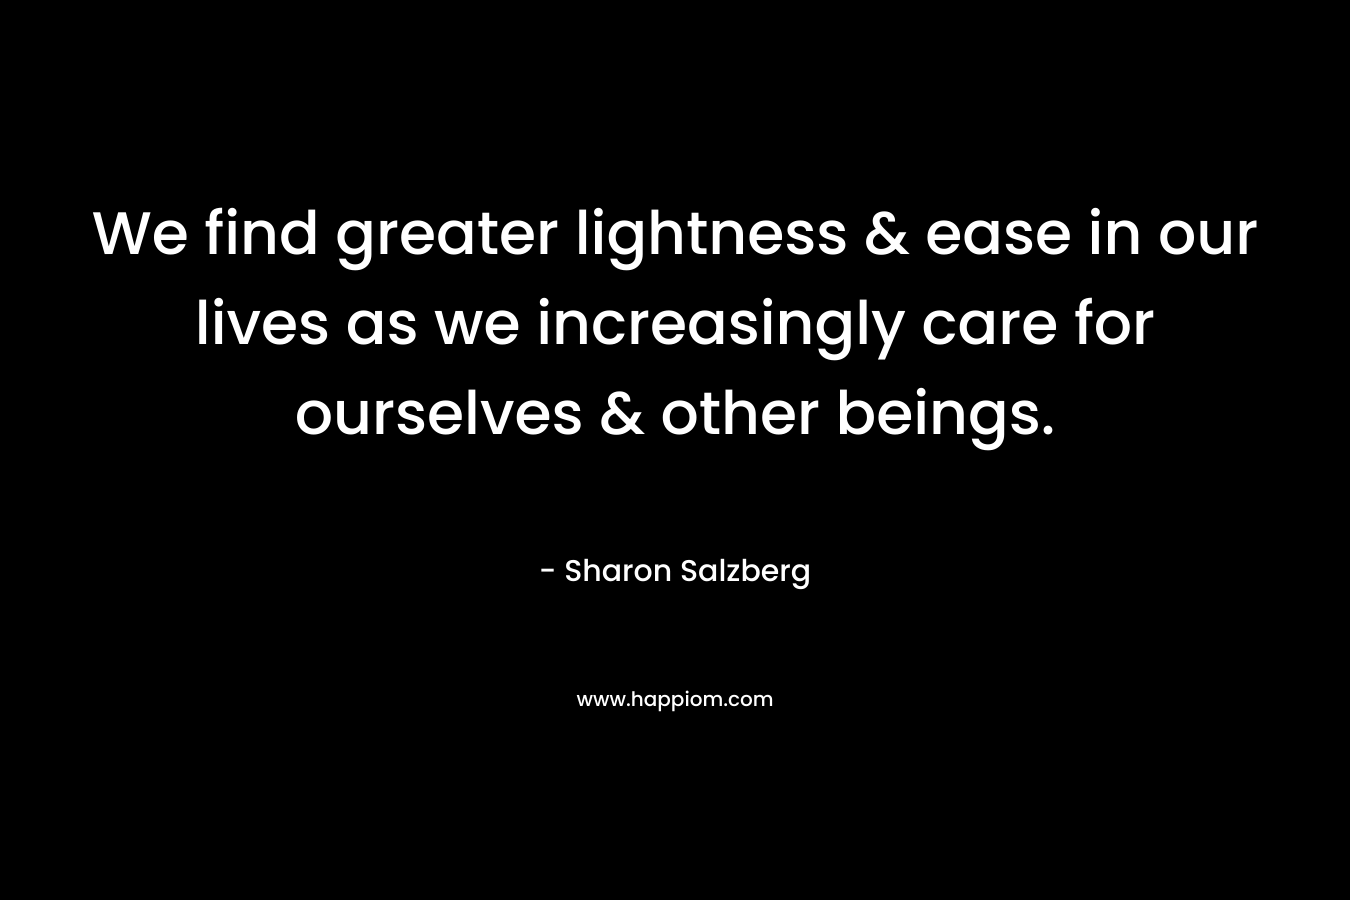 We find greater lightness & ease in our lives as we increasingly care for ourselves & other beings.